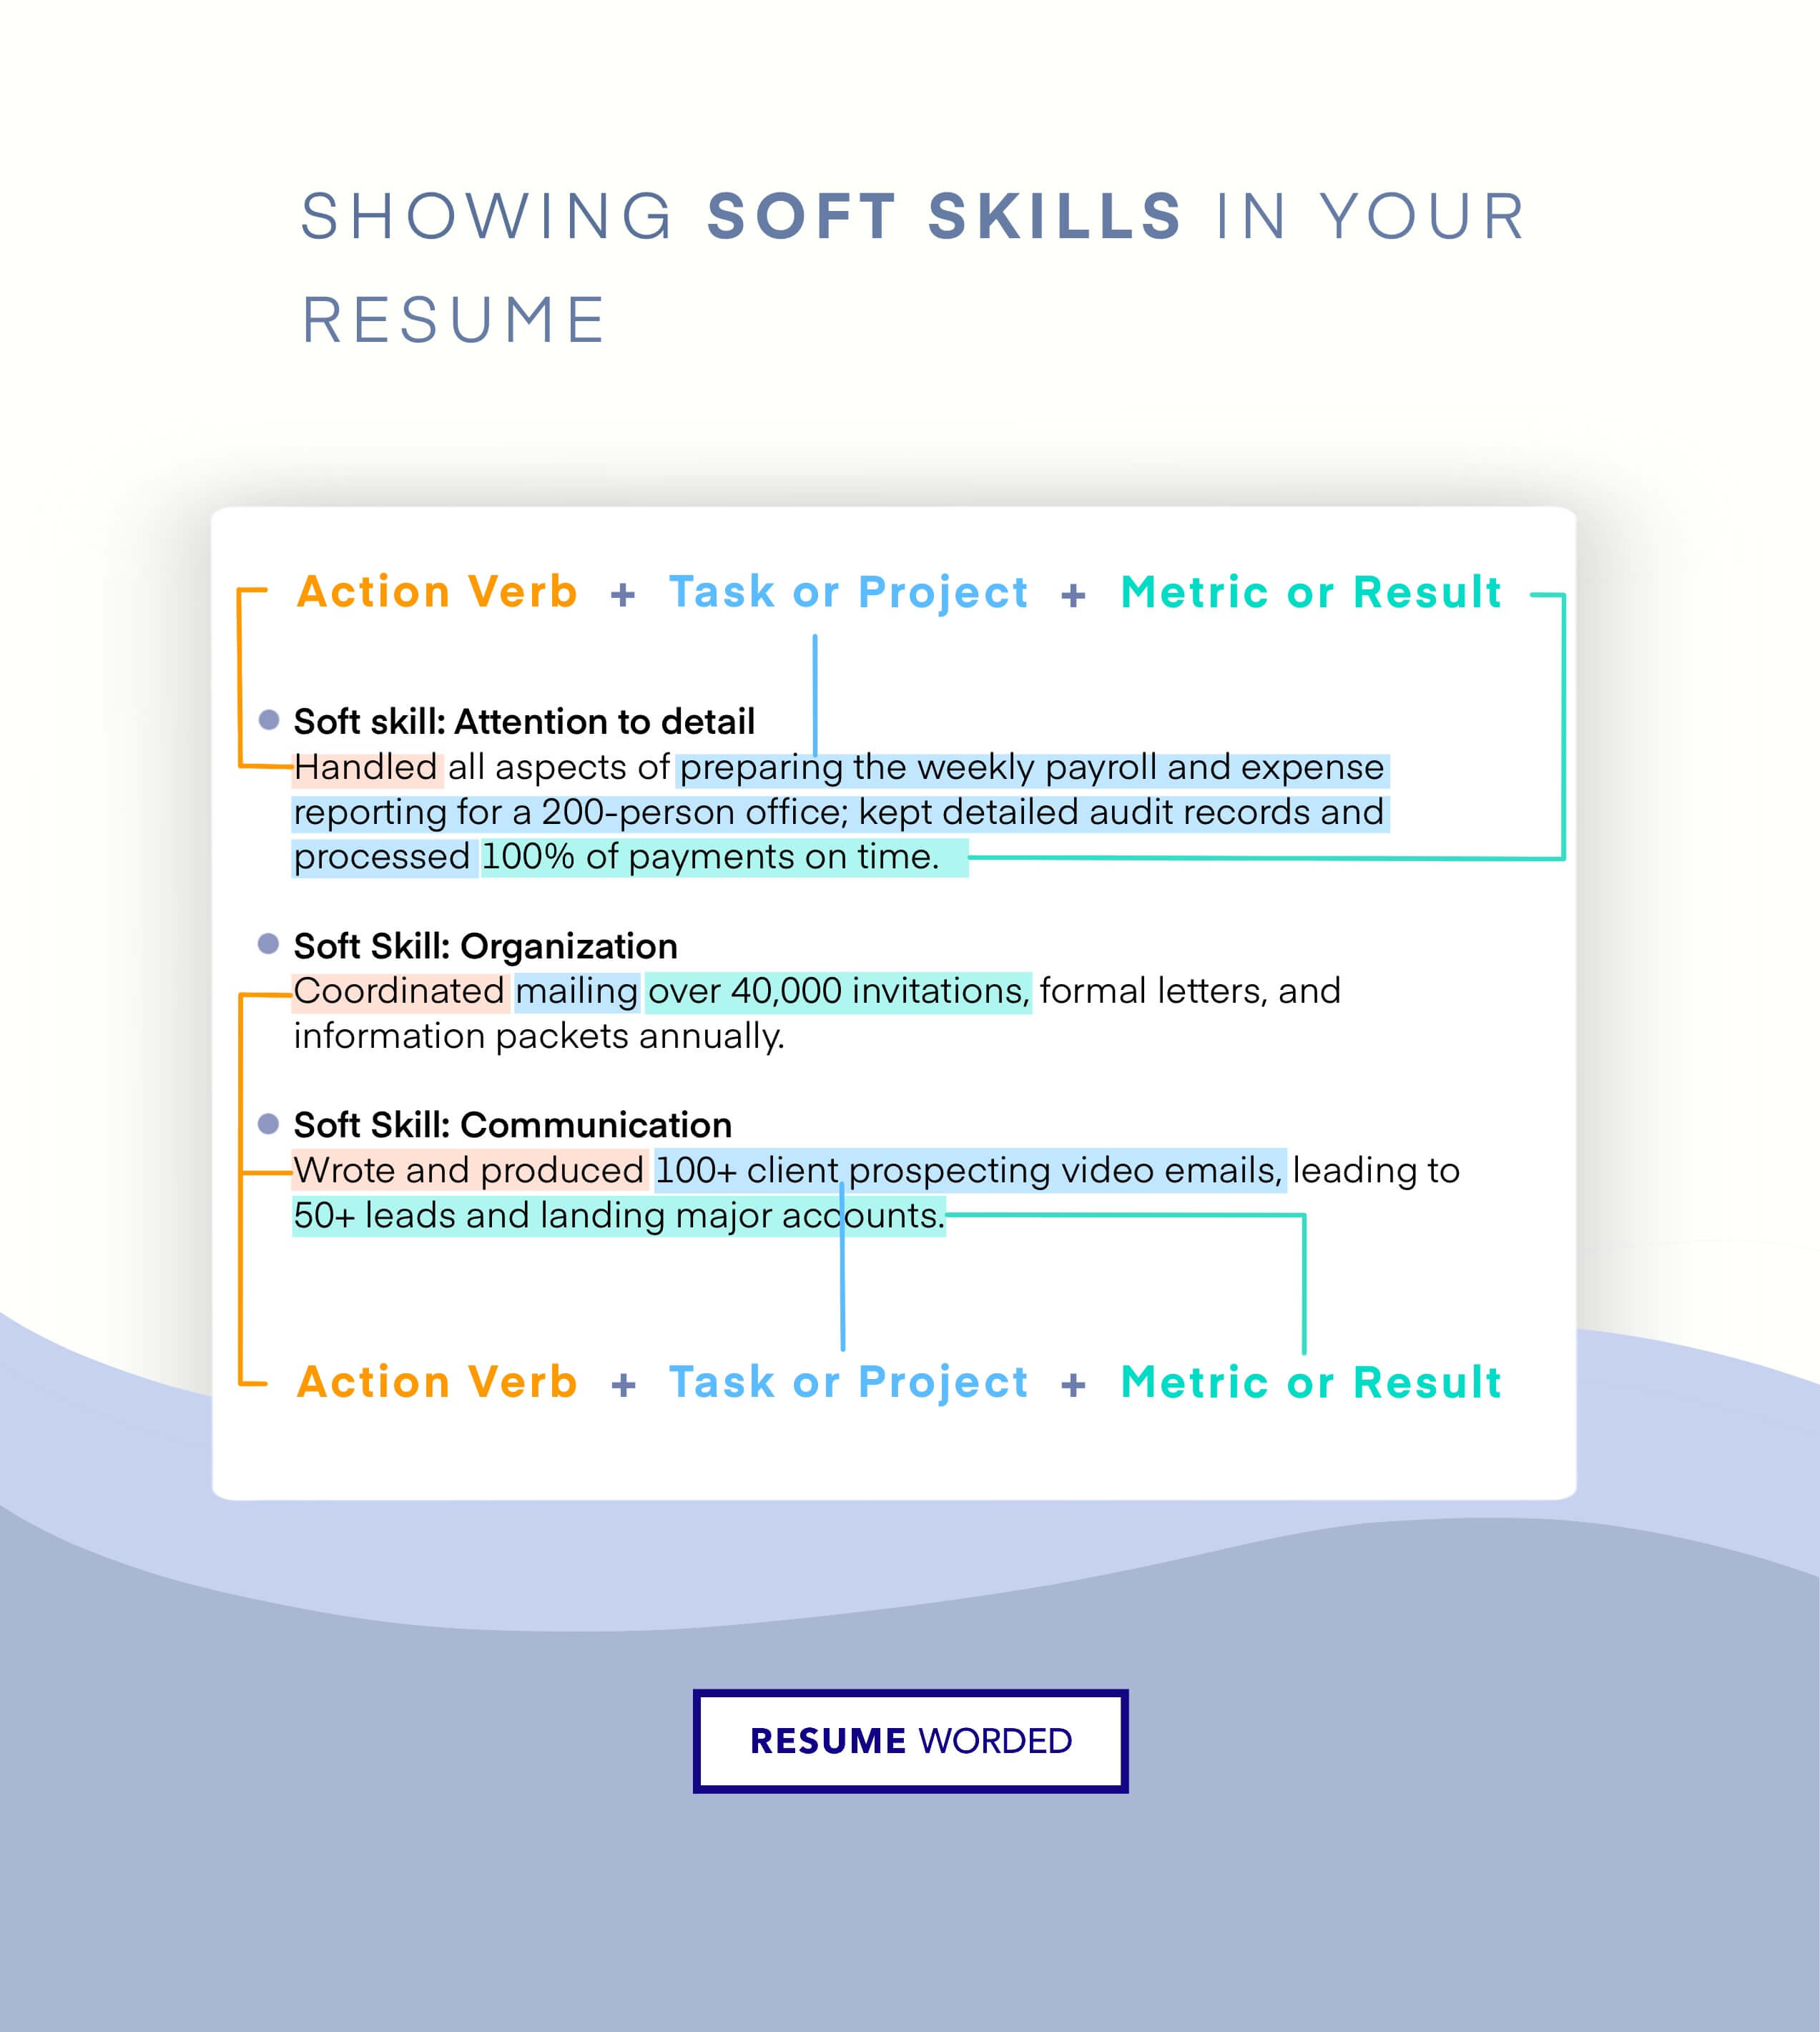 Six Soft Skills in Healthcare